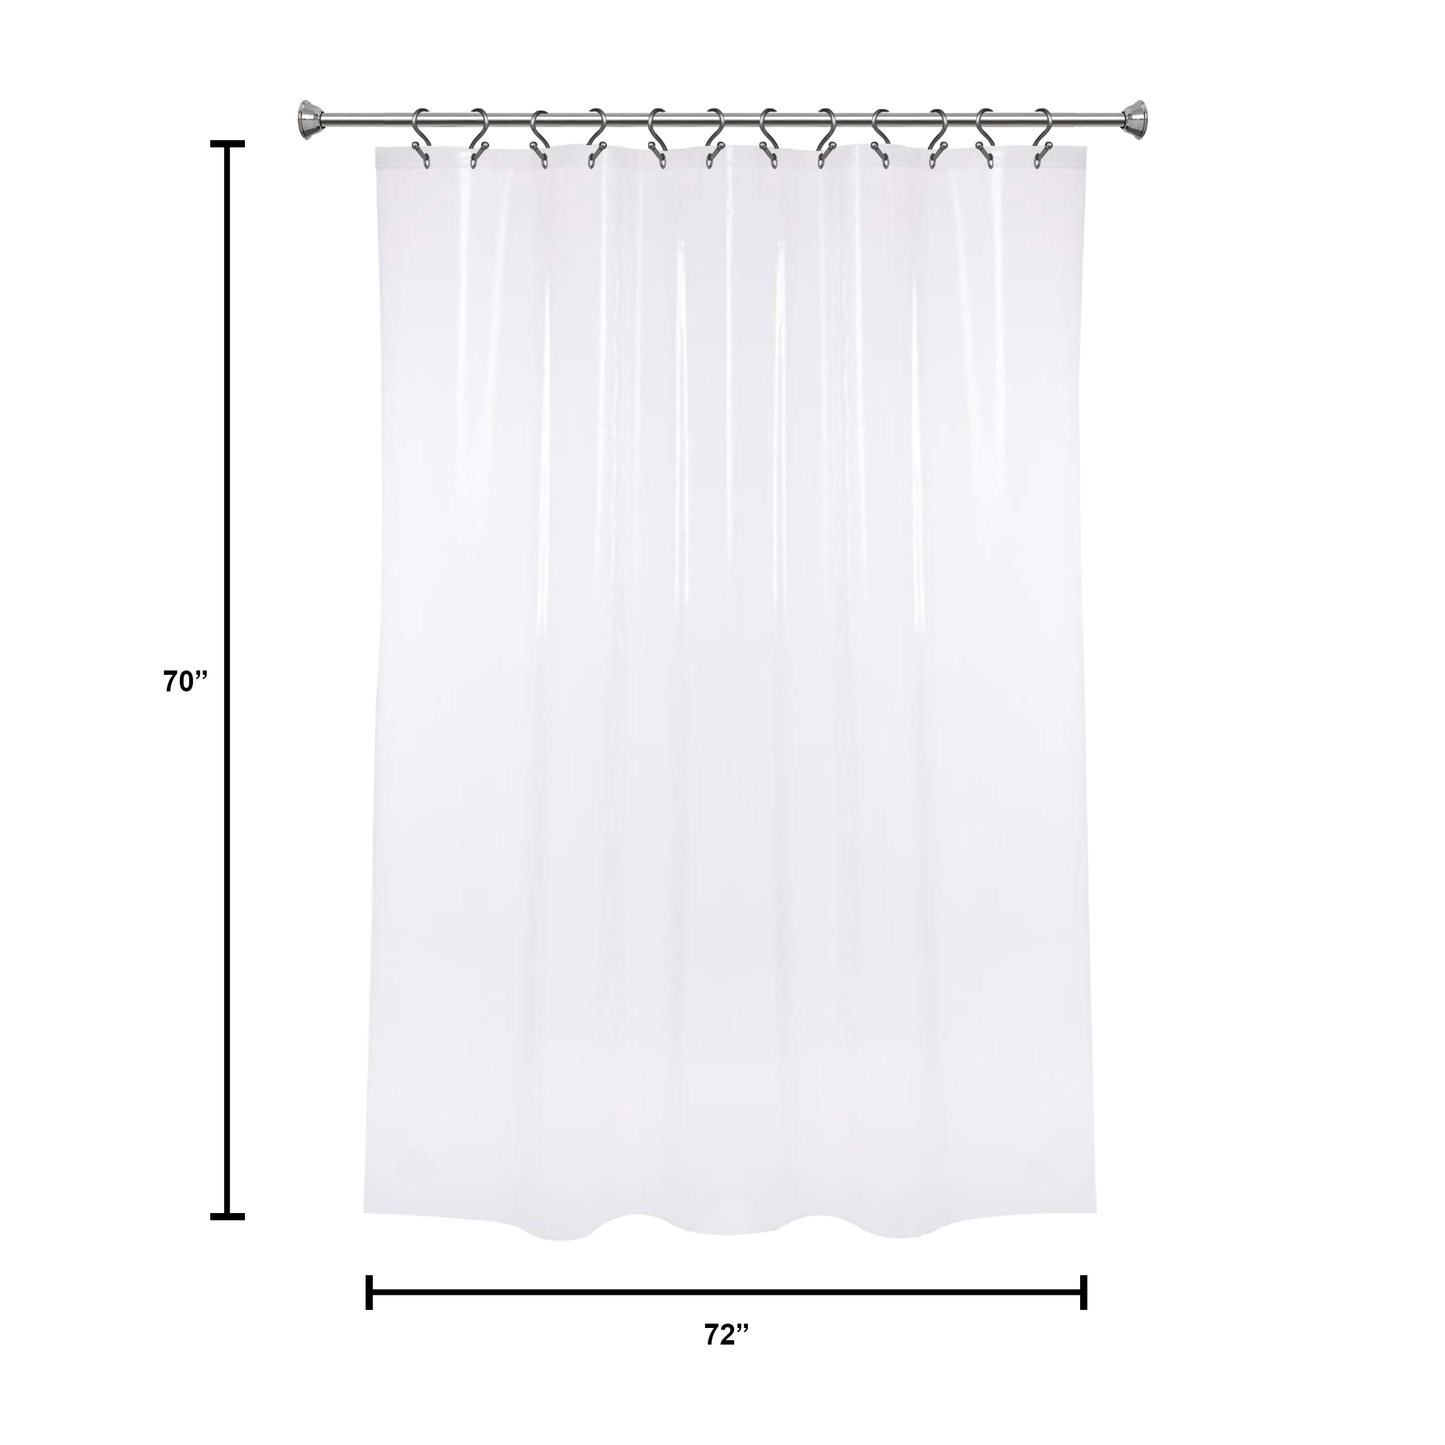 ULTRA Heavy Weight PEVA Shower Liner 70" X 72" - CLEAR